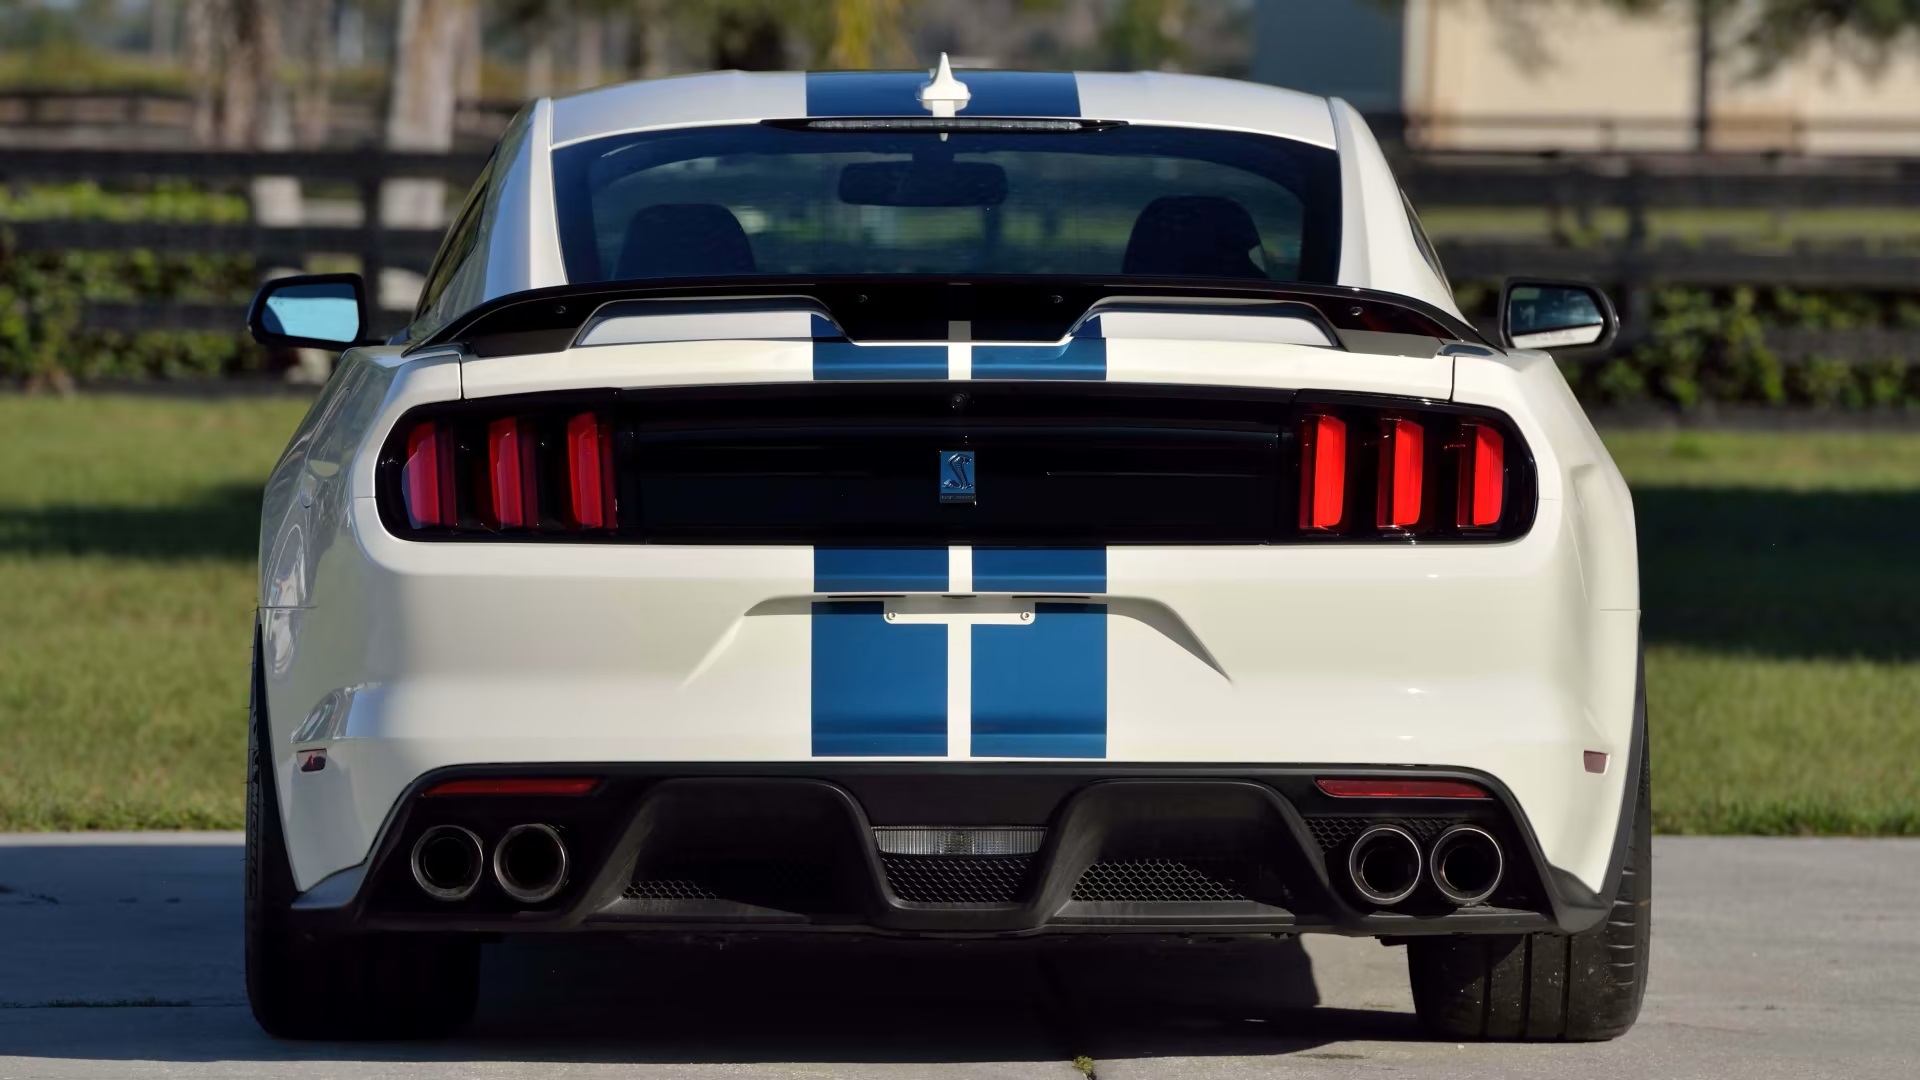  2020 Ford Mustang Shelby GT350 Heritage Edition